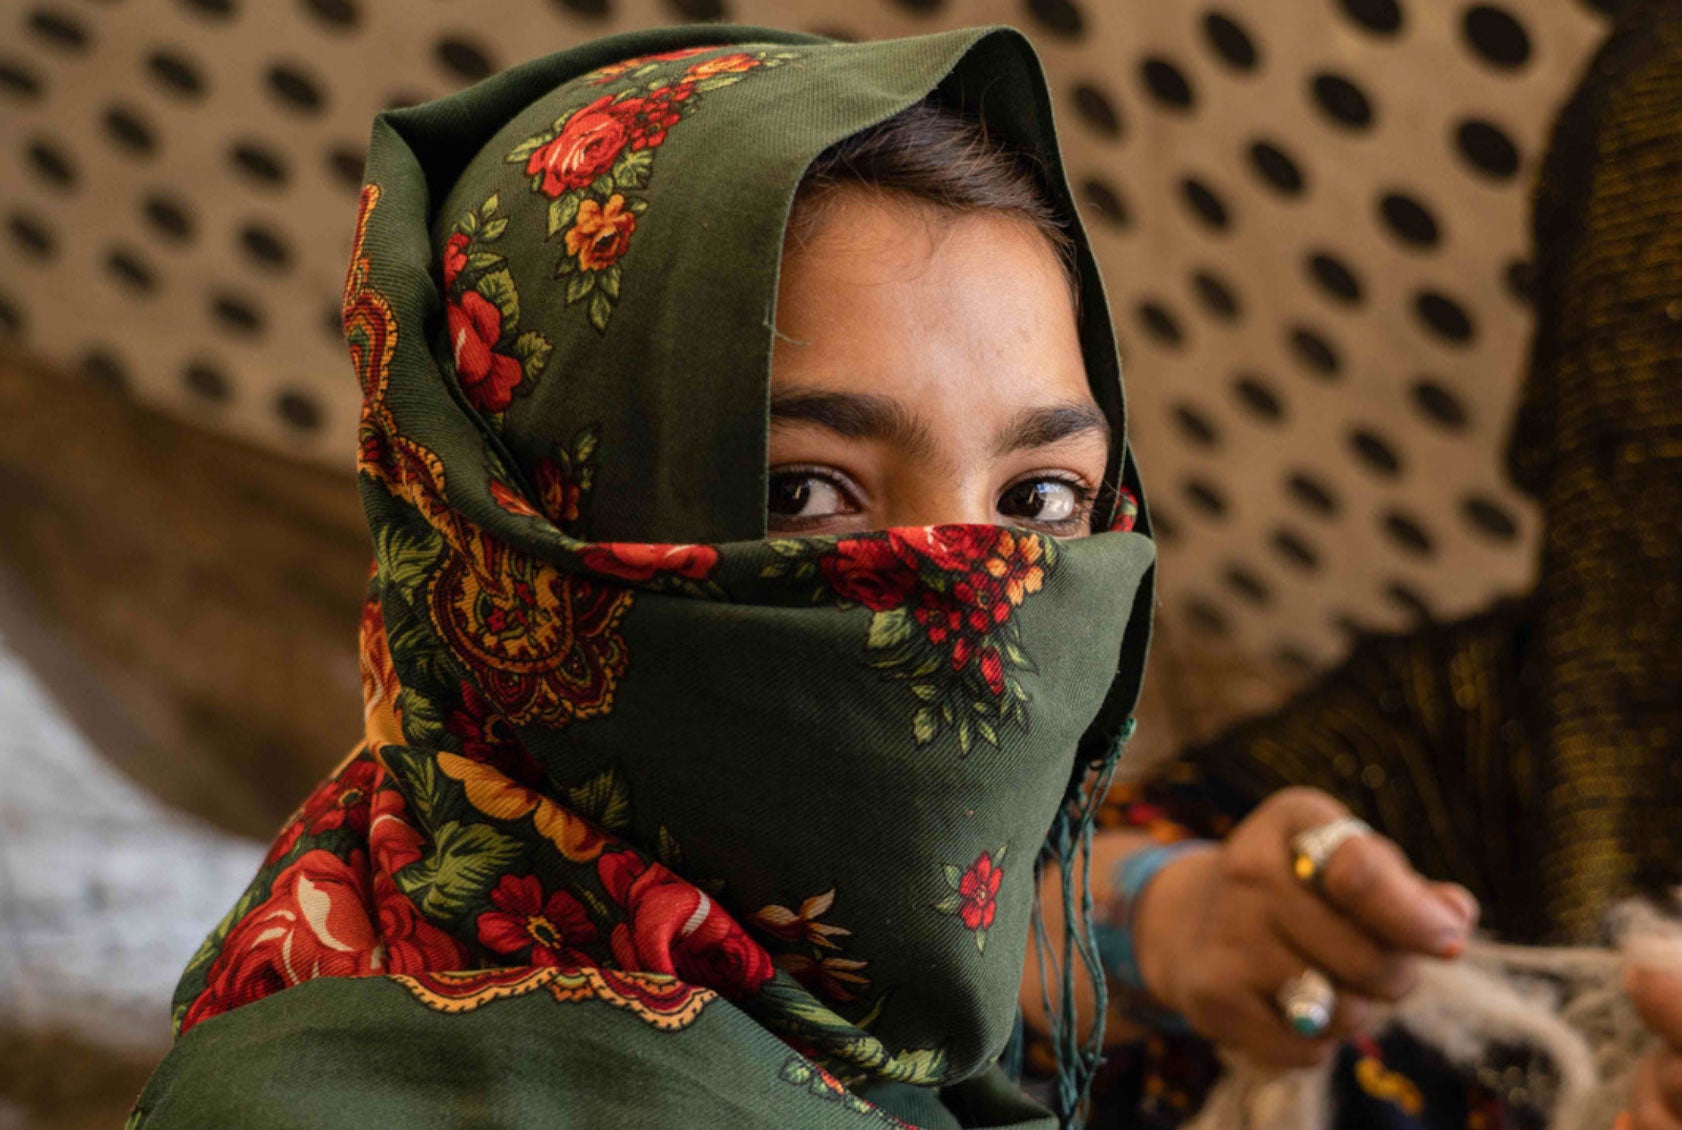 A young Afghan woman looks over her shoulder. Most of her face is covered by a green and red floral headscarf.